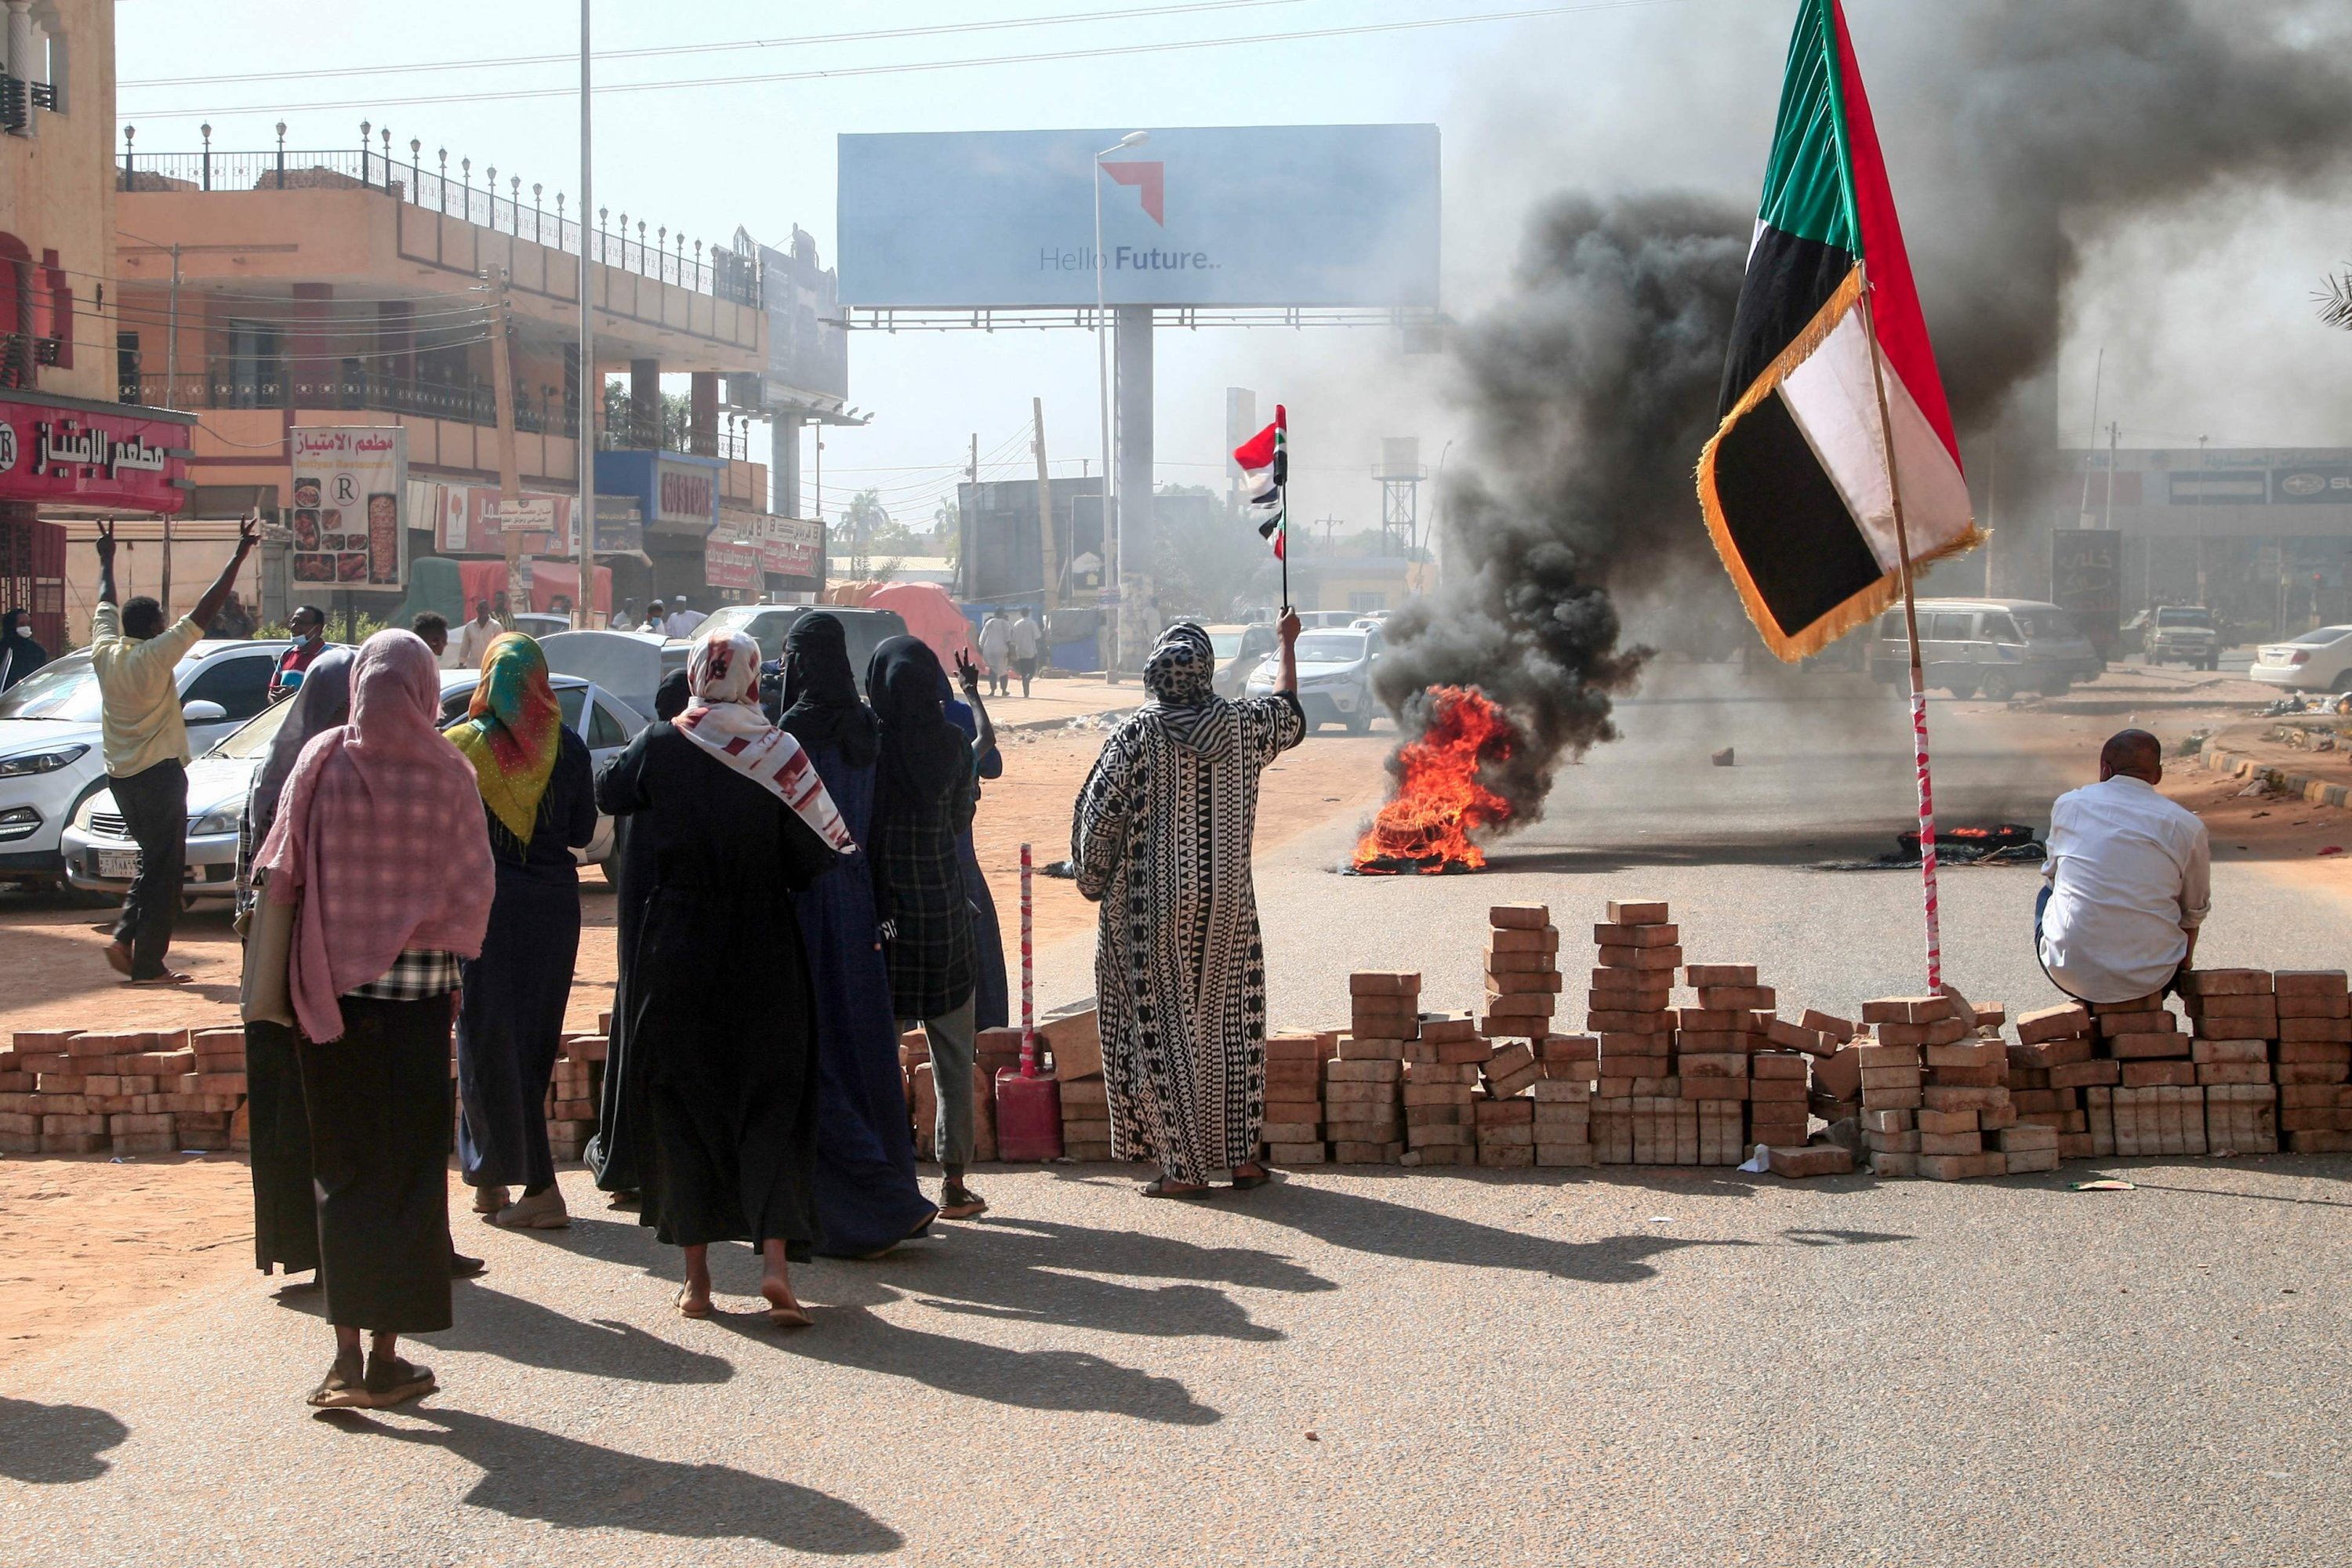 Sudanese protesters lift national flags next to a brick roadblock during a demonstration in the capital Khartoum, on Oct. 25, 2021, to denounce overnight detentions by the army of members of Sudan